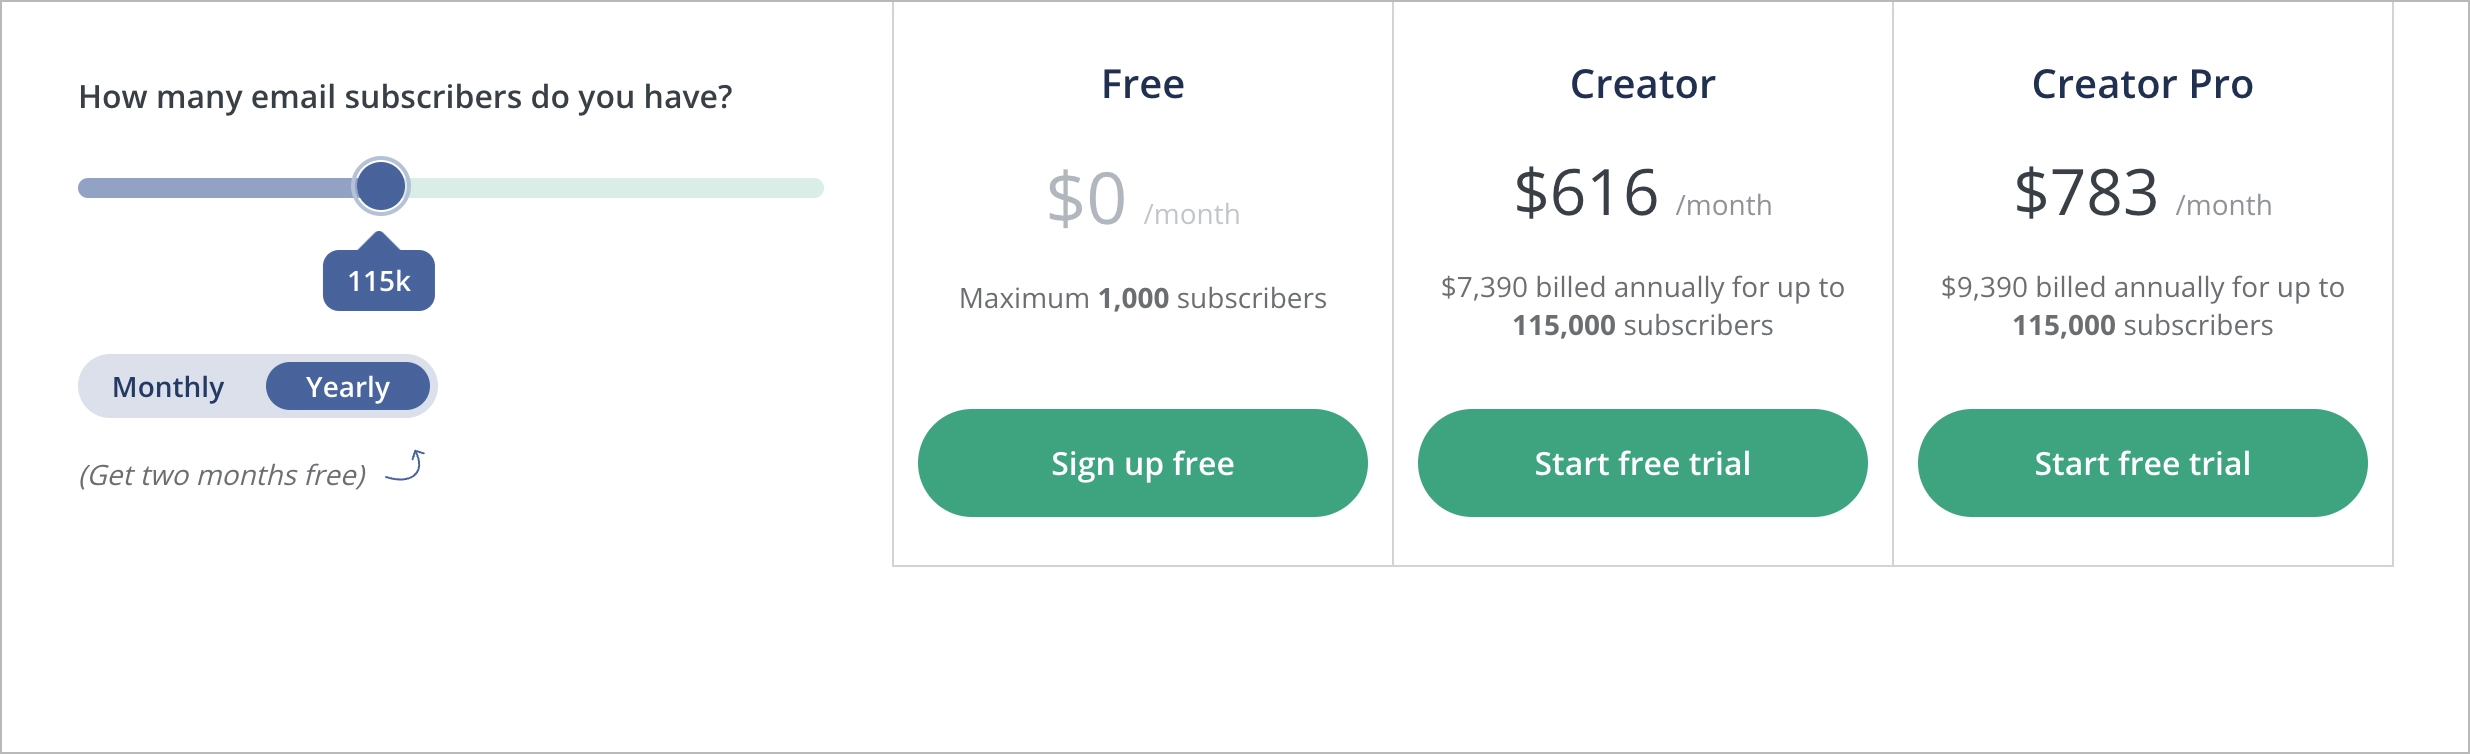 convertkit email marketing platform prices for free and paid plans